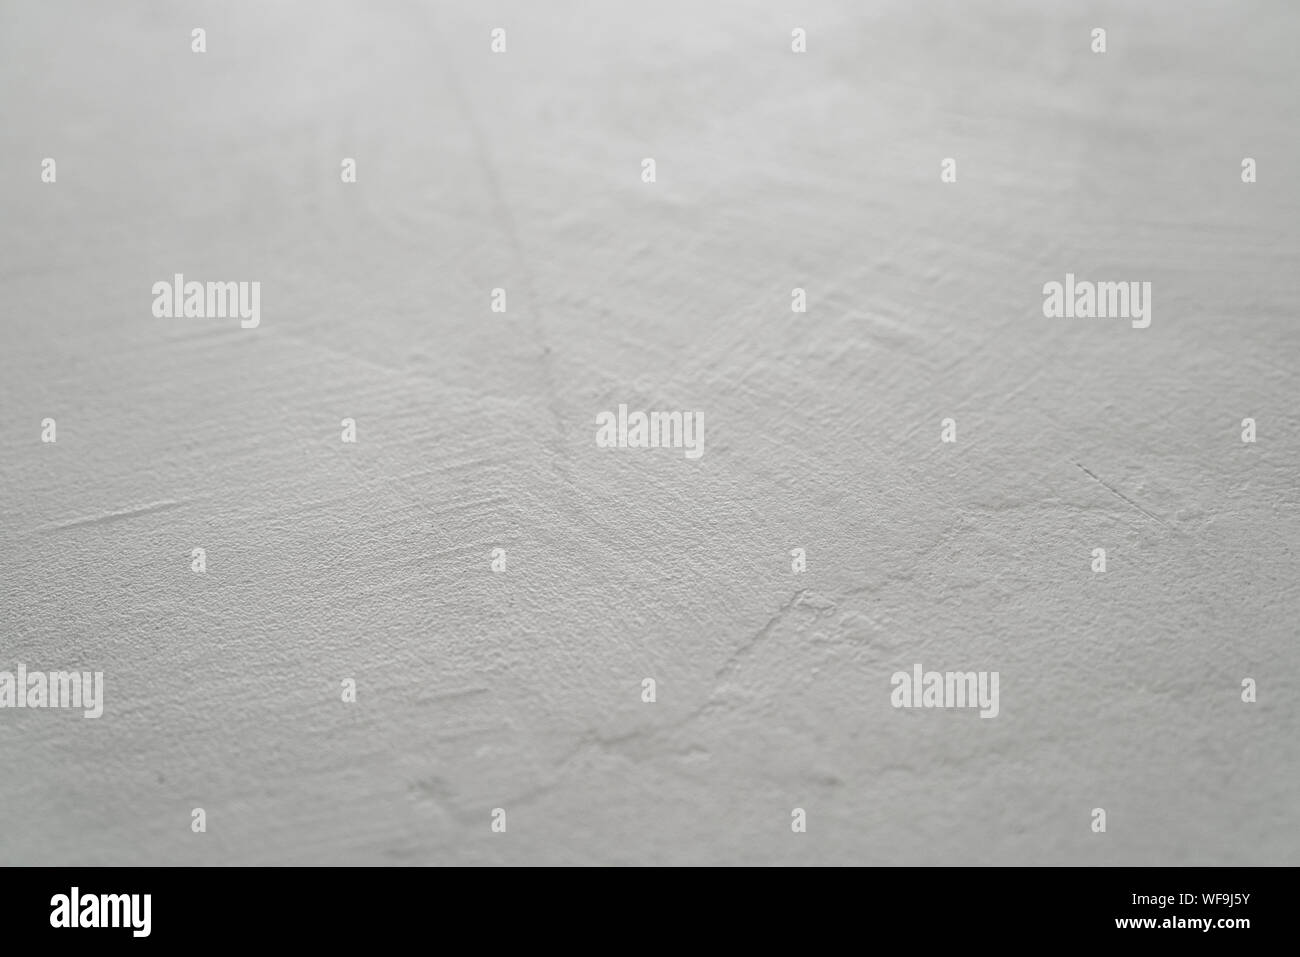 Closeup background of decorative plaster surface for product placement, good for backdrop Stock Photo